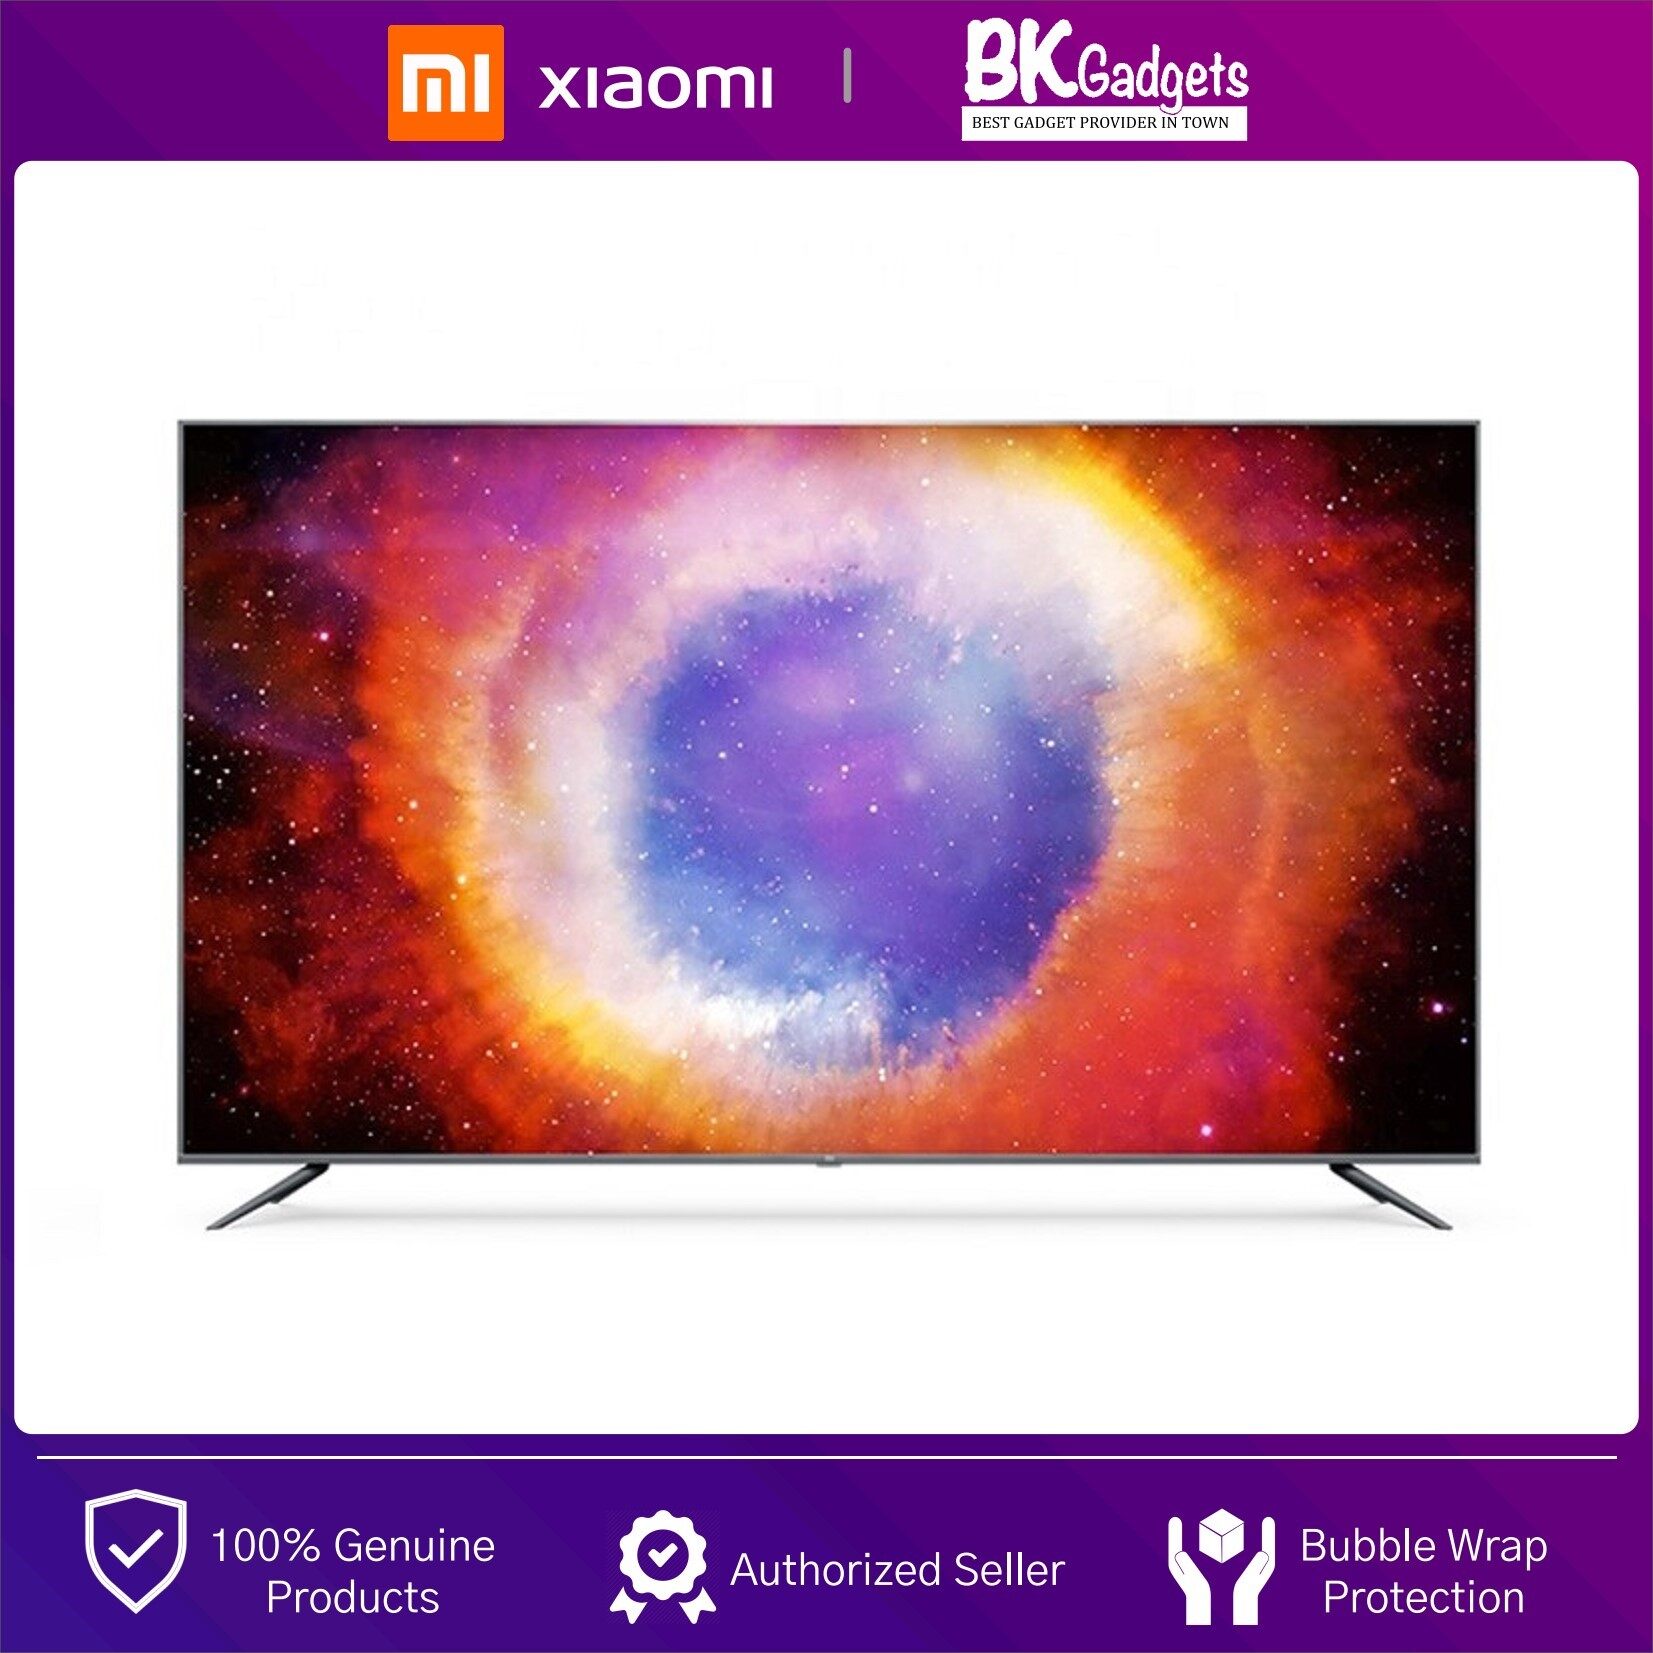 XiaoMi LED Smart TV 4S 75" 4K HDR [ Chinese Version ] - Dolby Sound Effect | DTS HD | 60Hz | 1 Year Malaysia Warranty